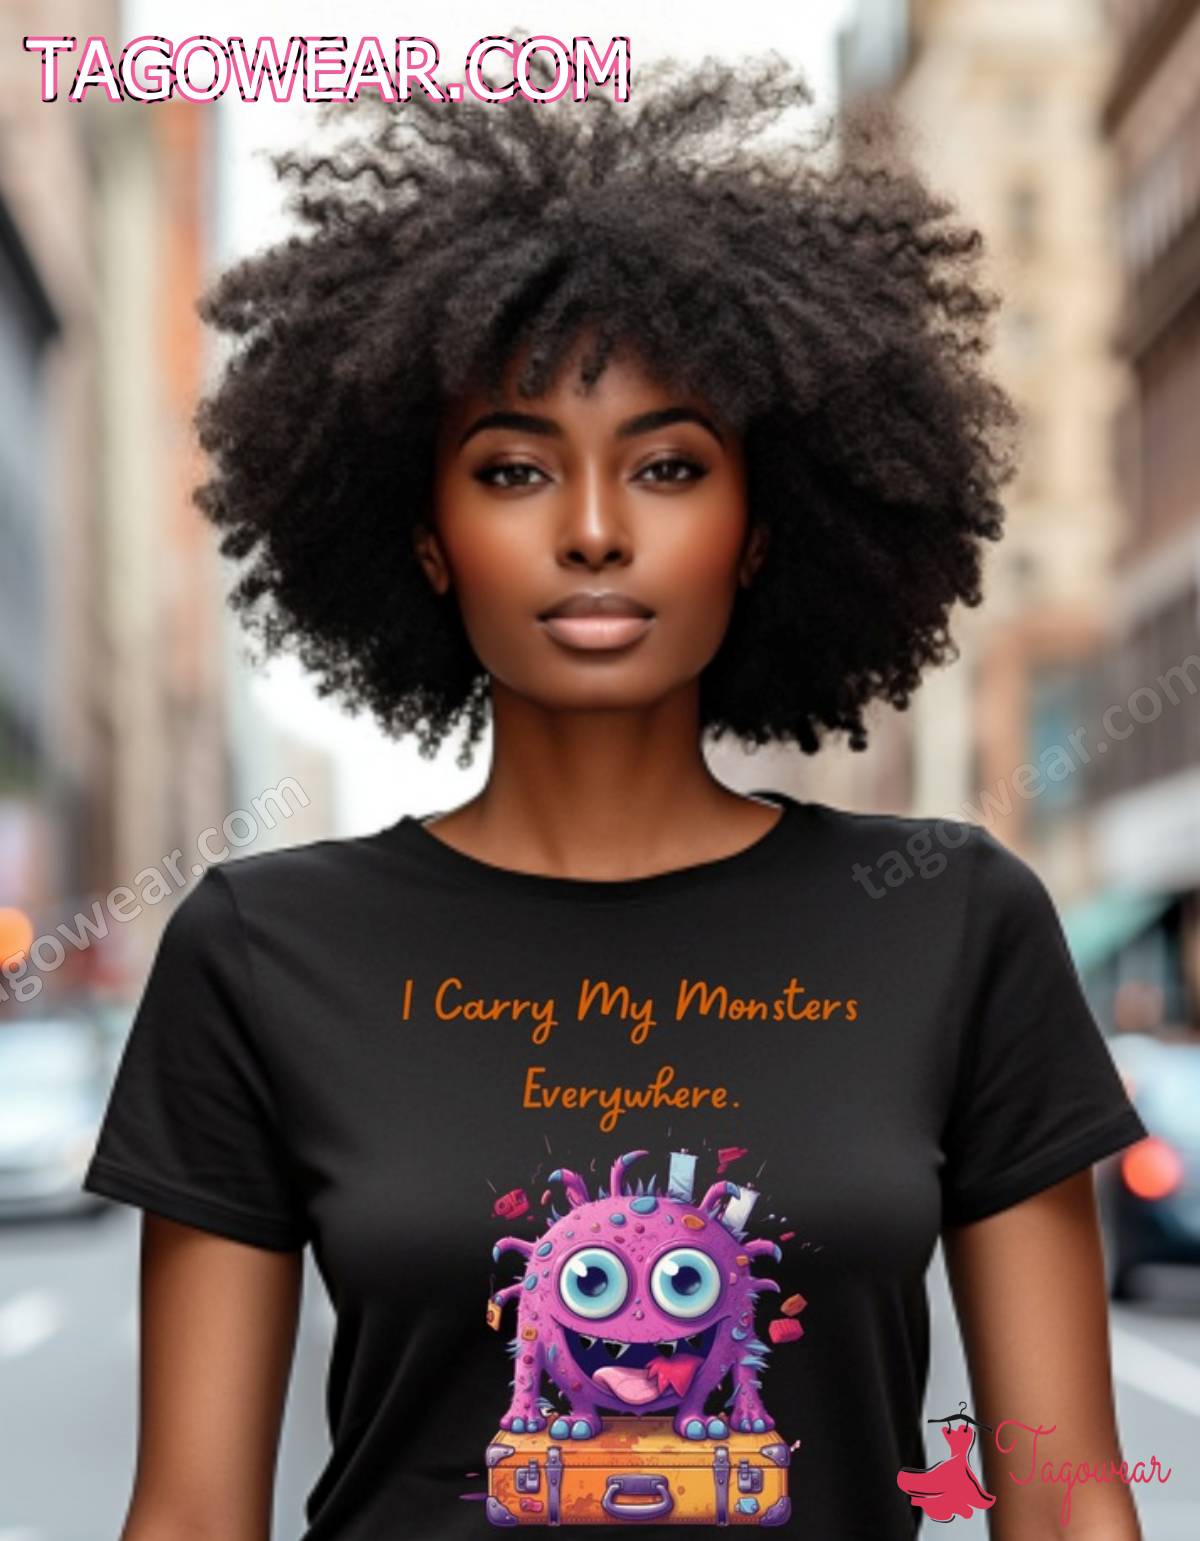 I Carry My Monsters Everywhere Shirt